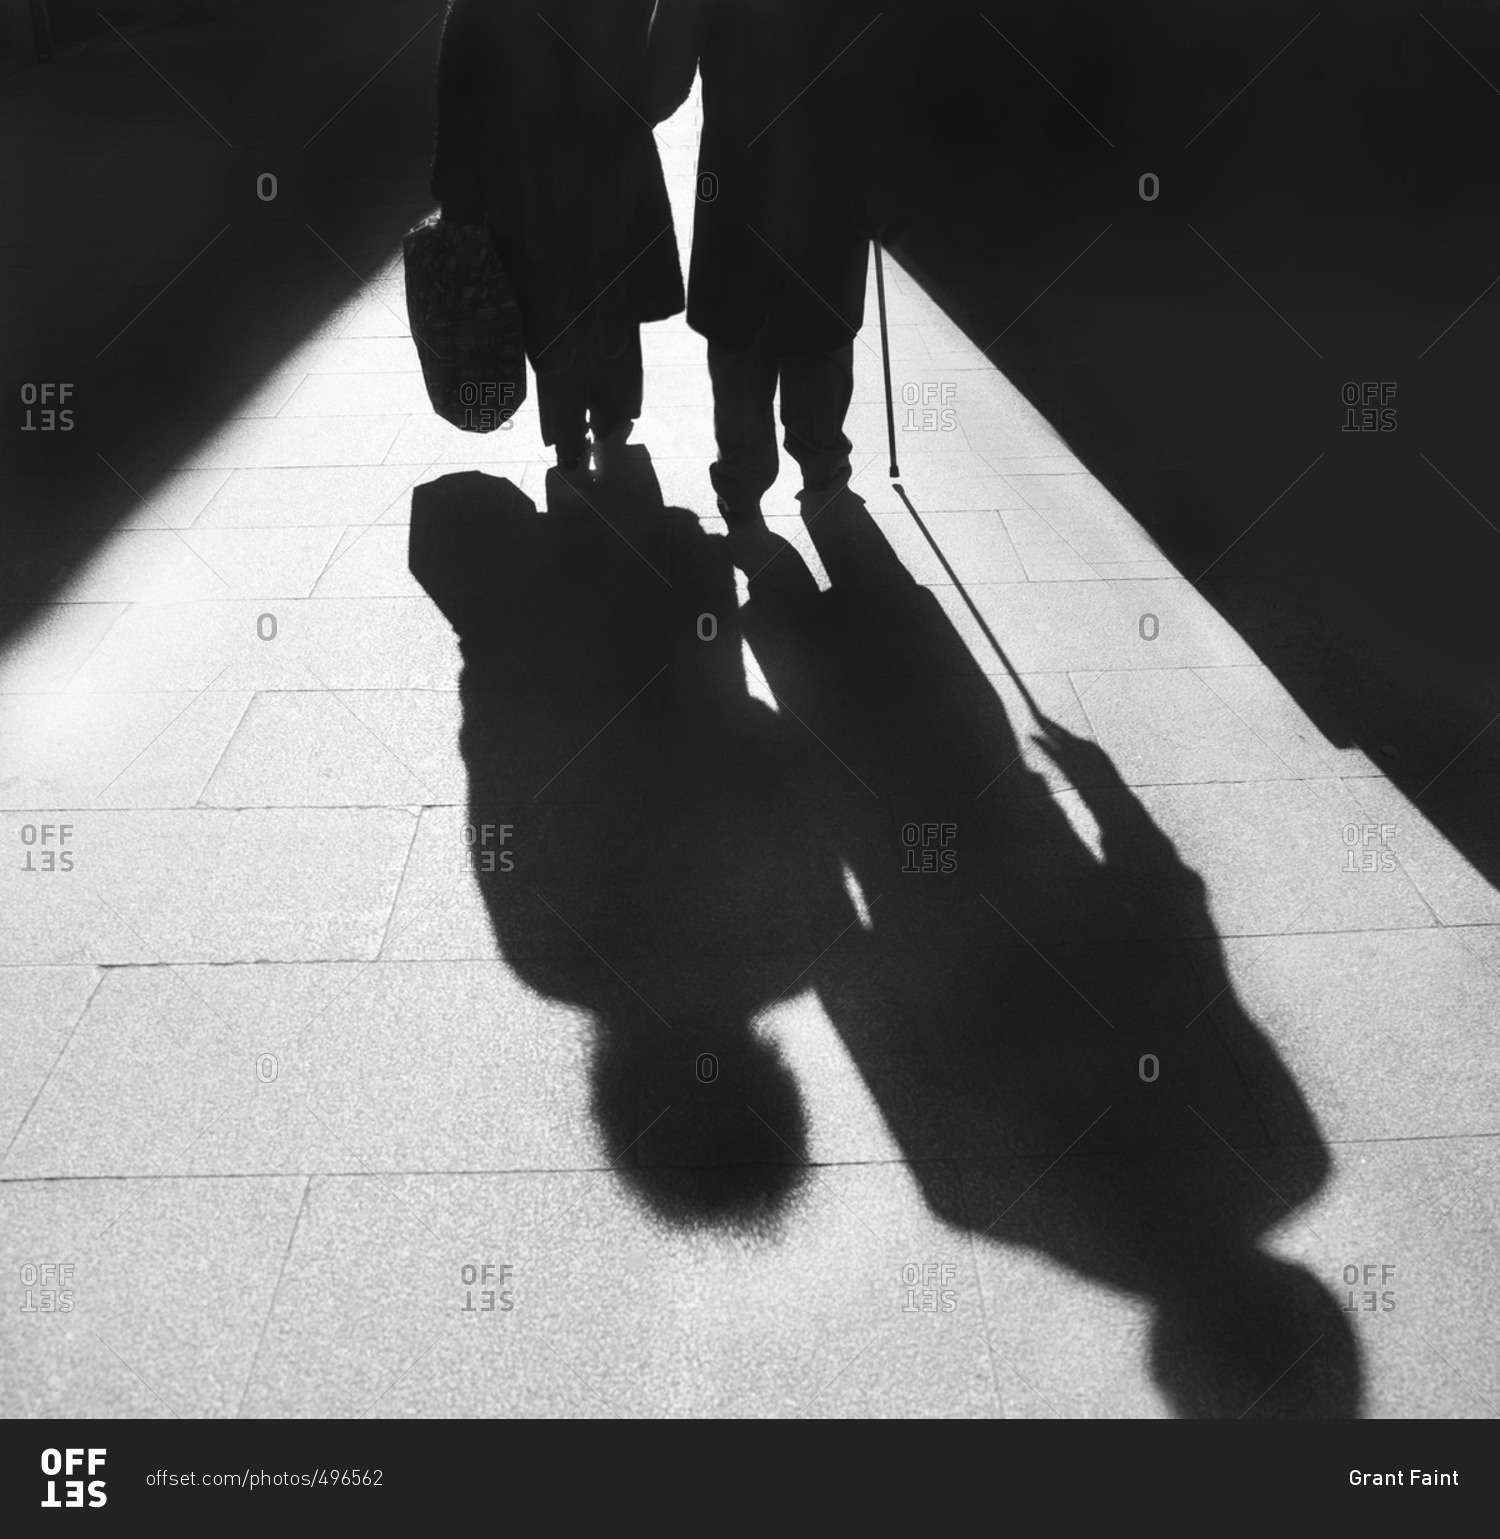 Shadow of older couple walking together